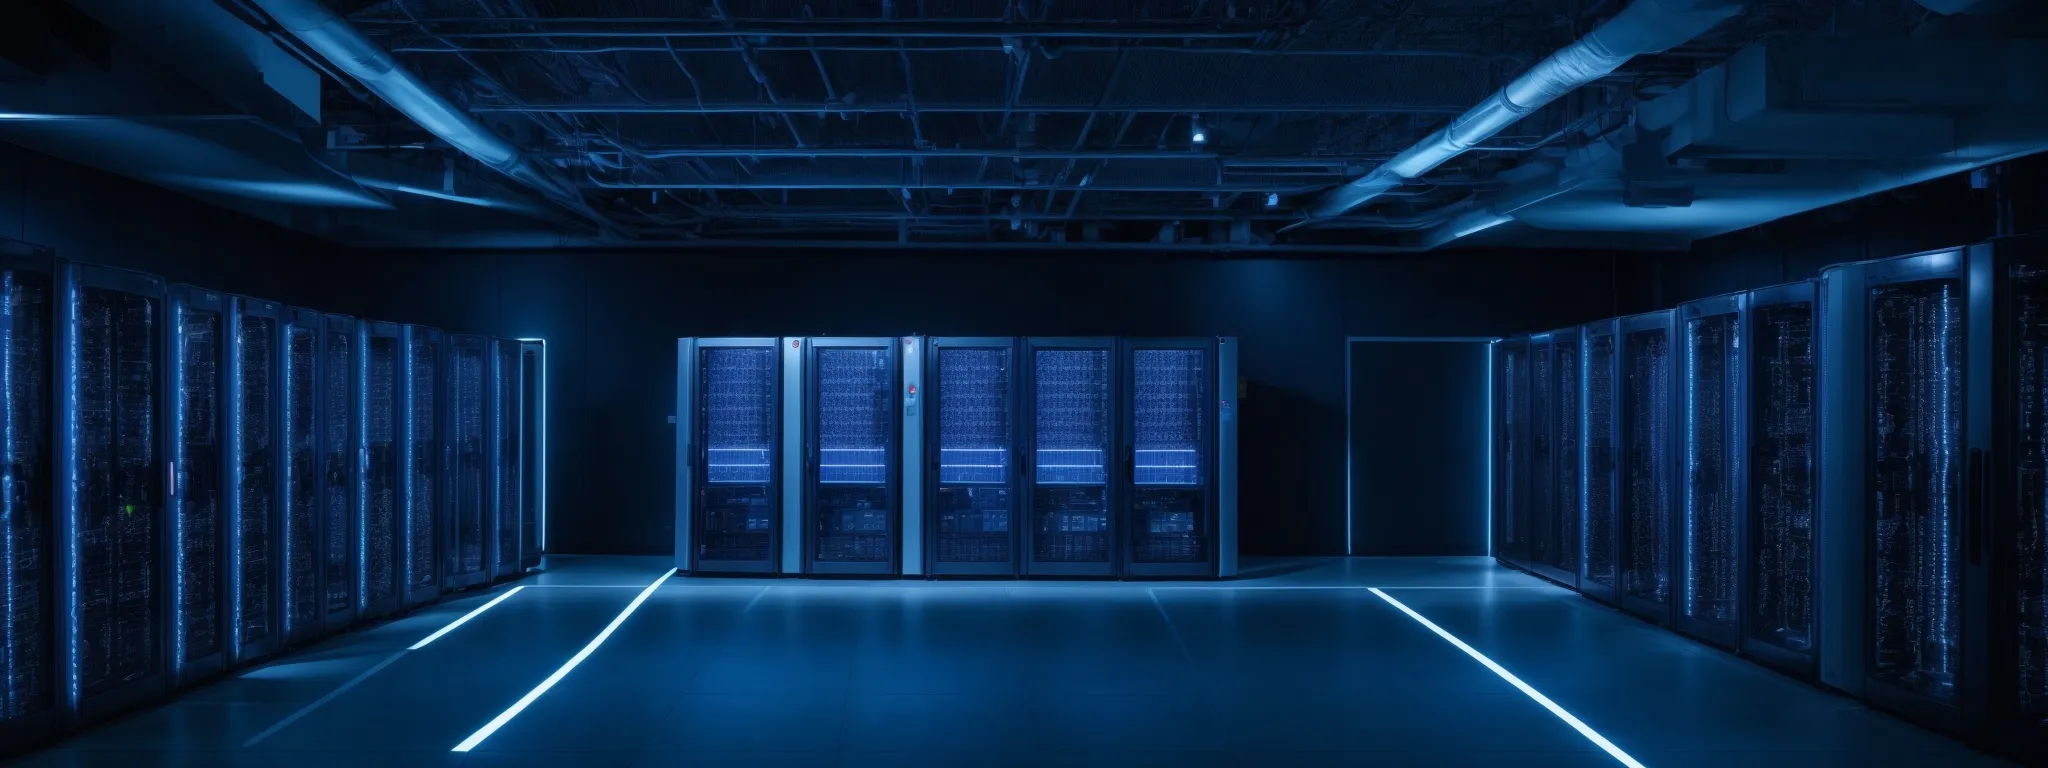 a panoramic view of a modern data center with rows of servers and blue led lights signifying digital security and network infrastructure.